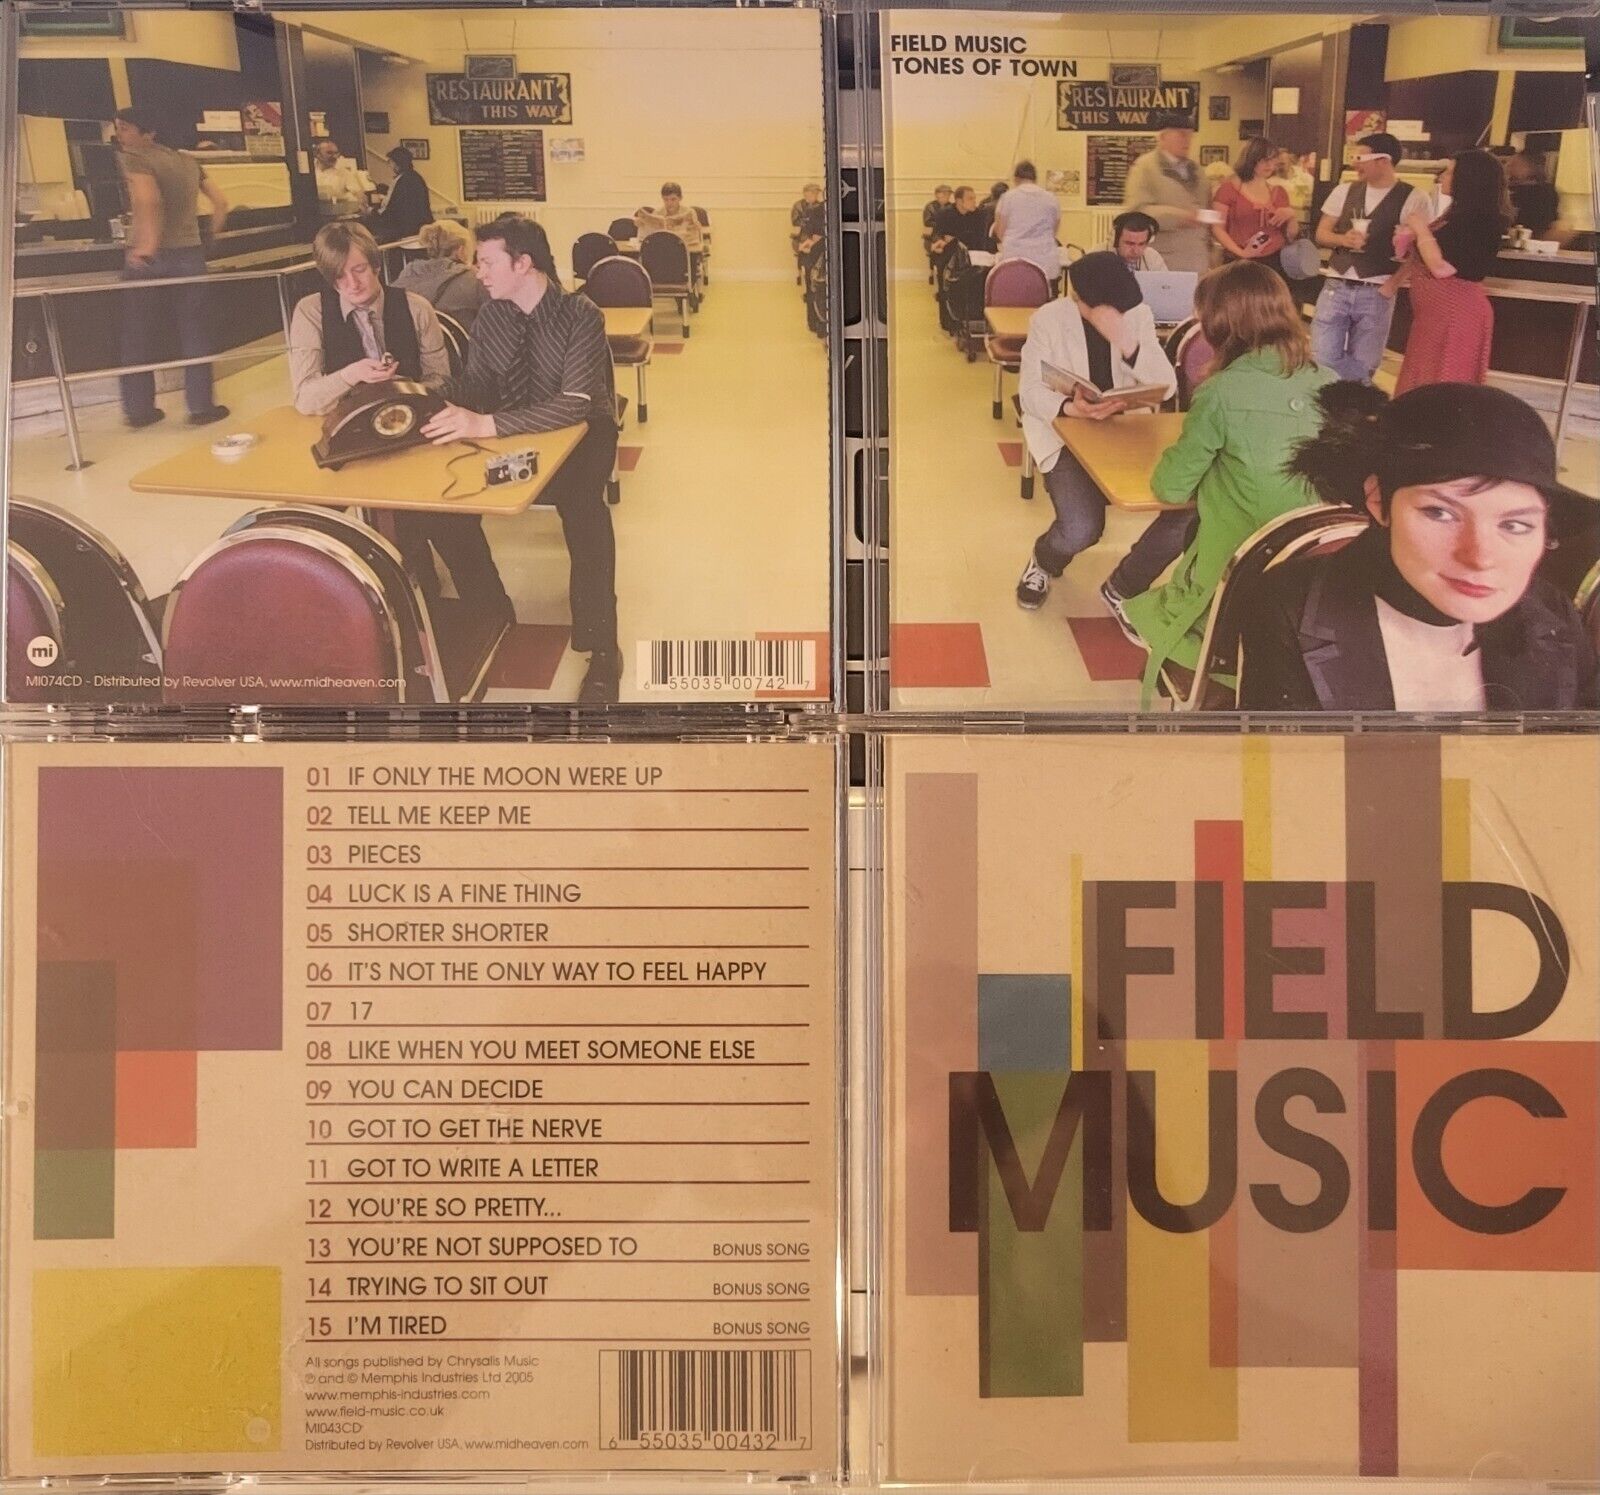 Lot 2-CDs Field Music (Self-Titled) Tones of Town FAST SHIPPING FROM USA